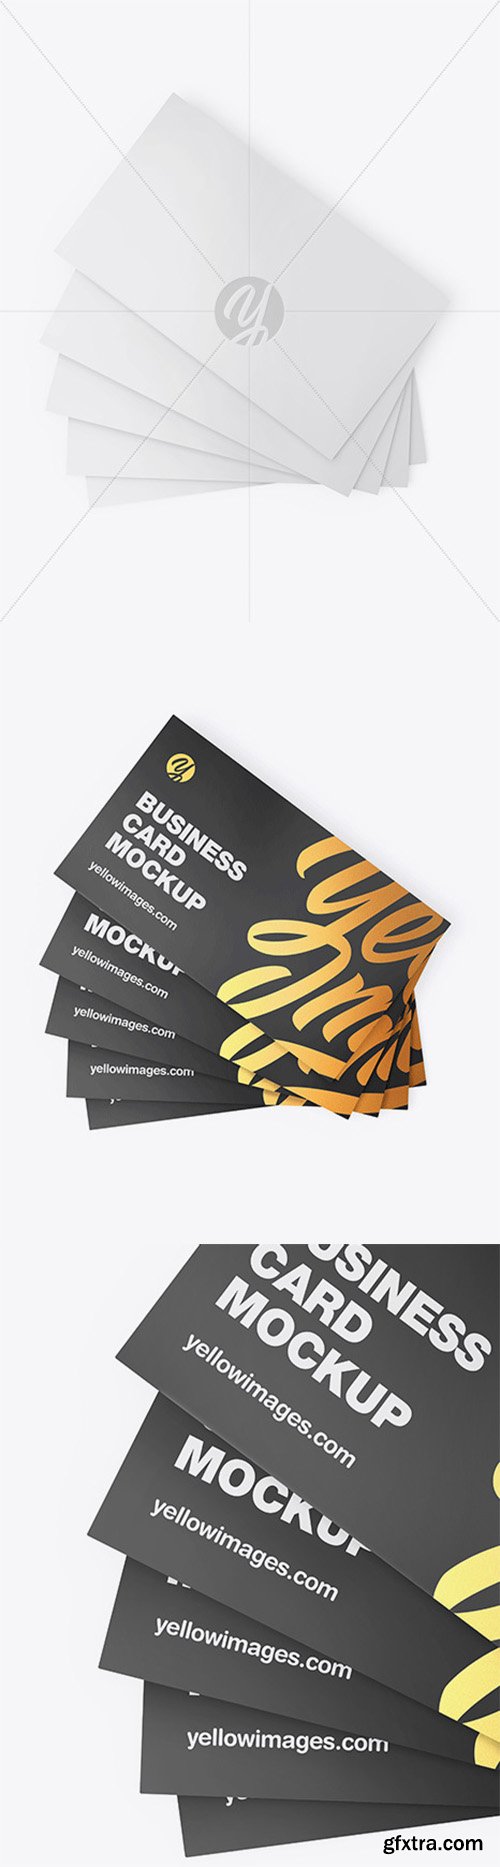 Download Business Cards Mockup 55237 Gfxtra Yellowimages Mockups